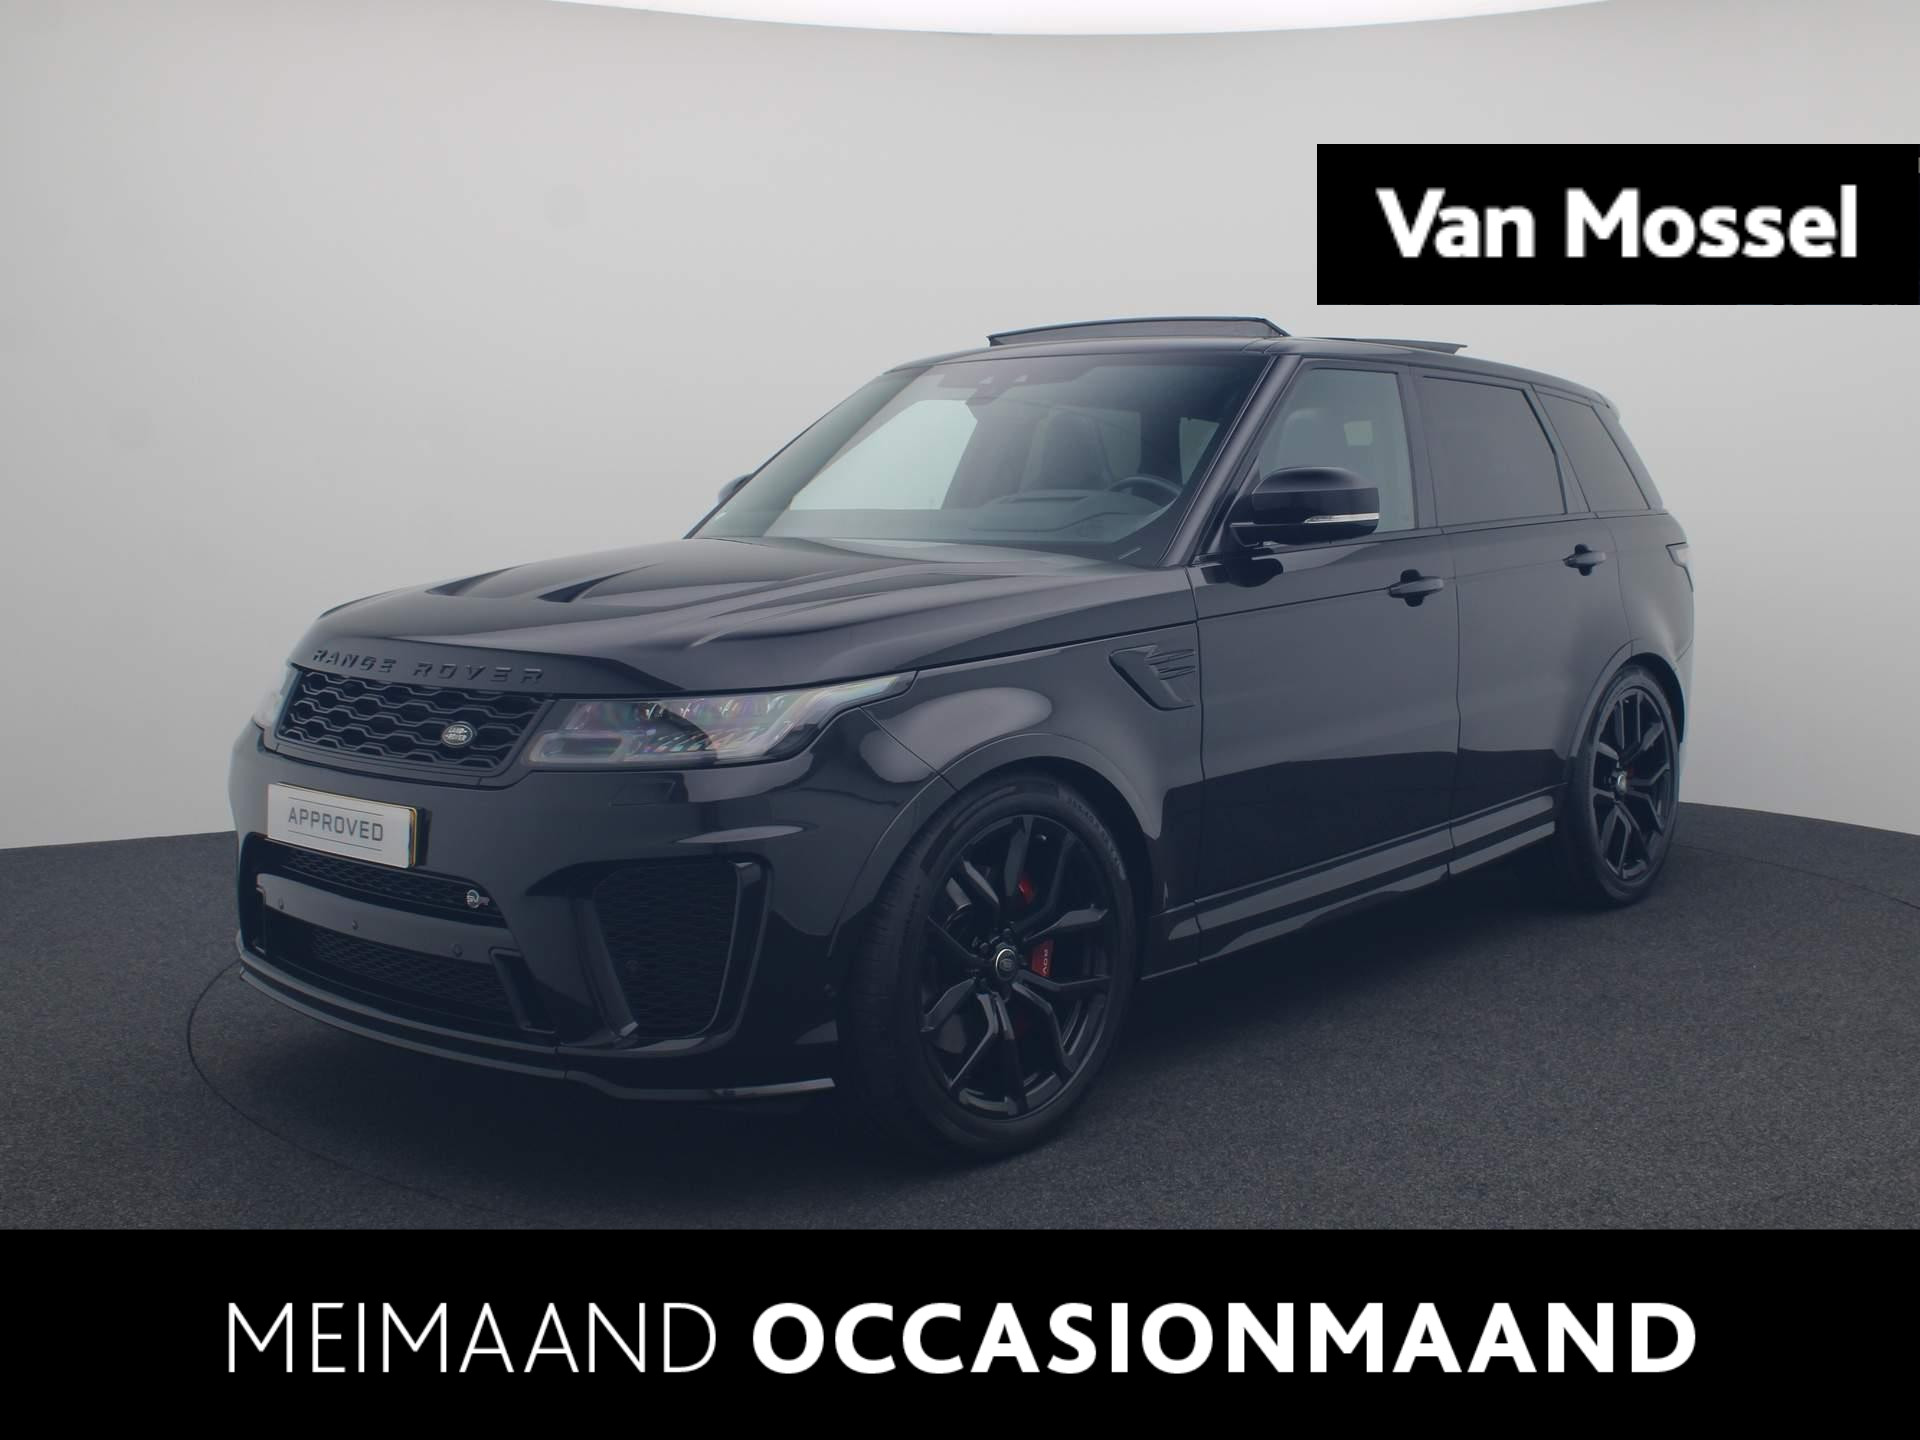 Land Rover Range Rover Sport 5.0 V8 SUPER CHARGED SVR | NP Eur 230.022,- | Head Up | Panorama Dak | 22 Inch | Carbon interieur |